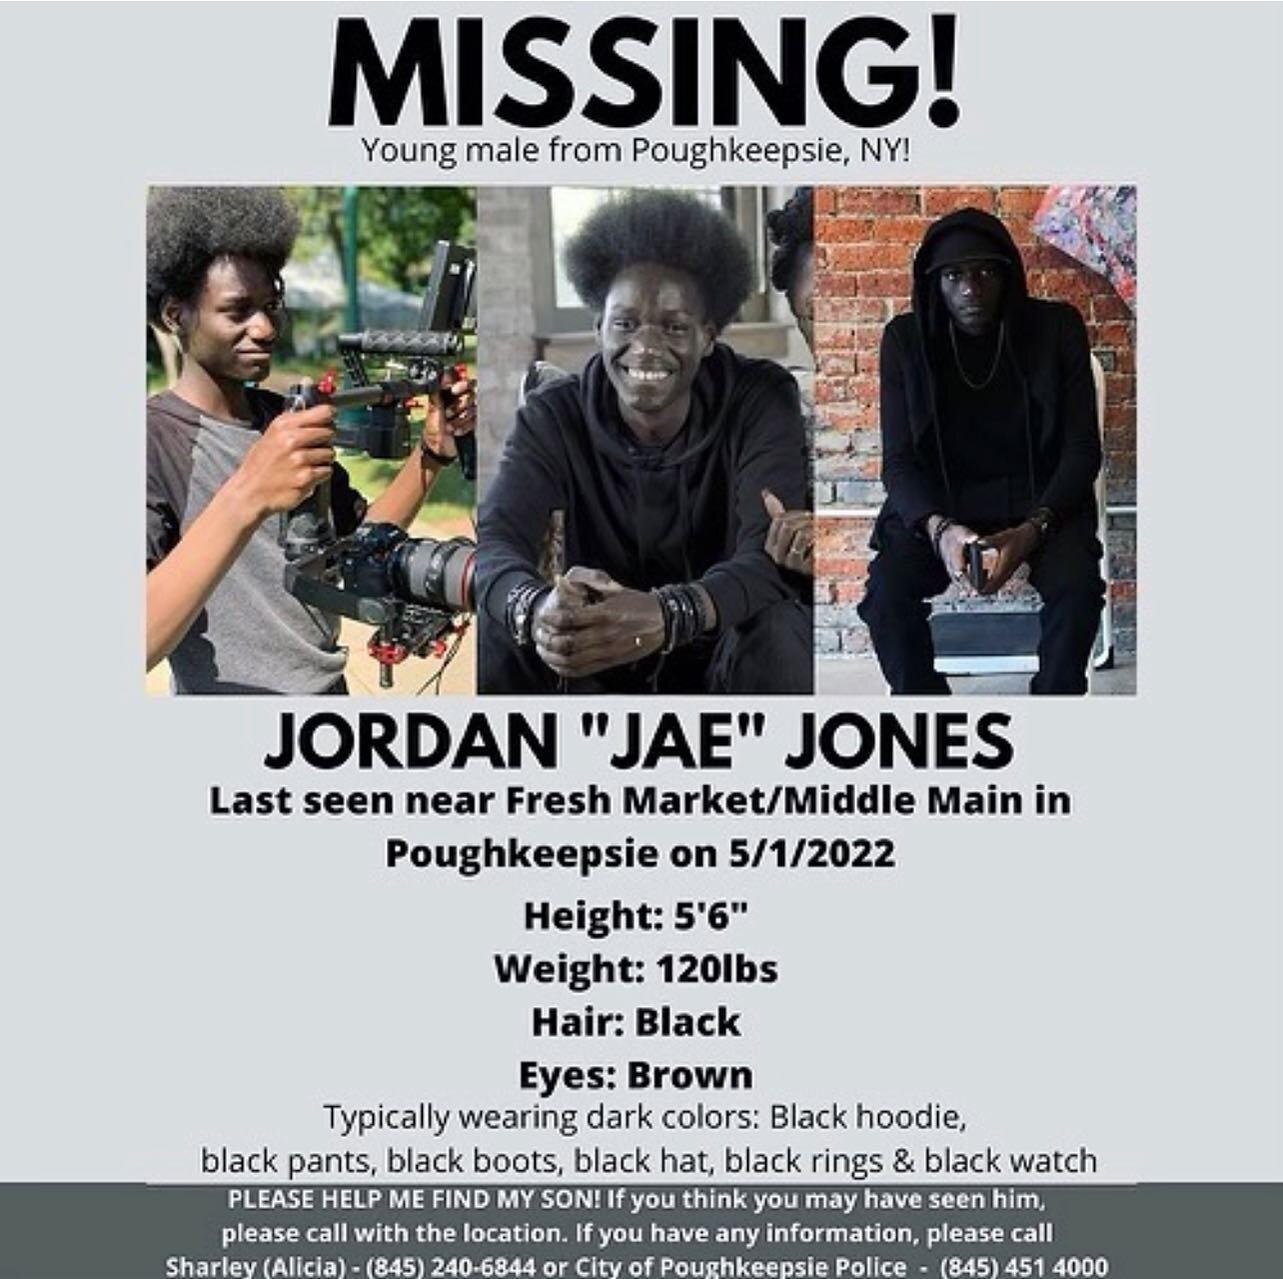 It has been 14 days. The urgency and attention given to finding Jordan needs to only be going up, not down. PLEASE SHARE #poughkeepsie #missing #BLM #JordanJones